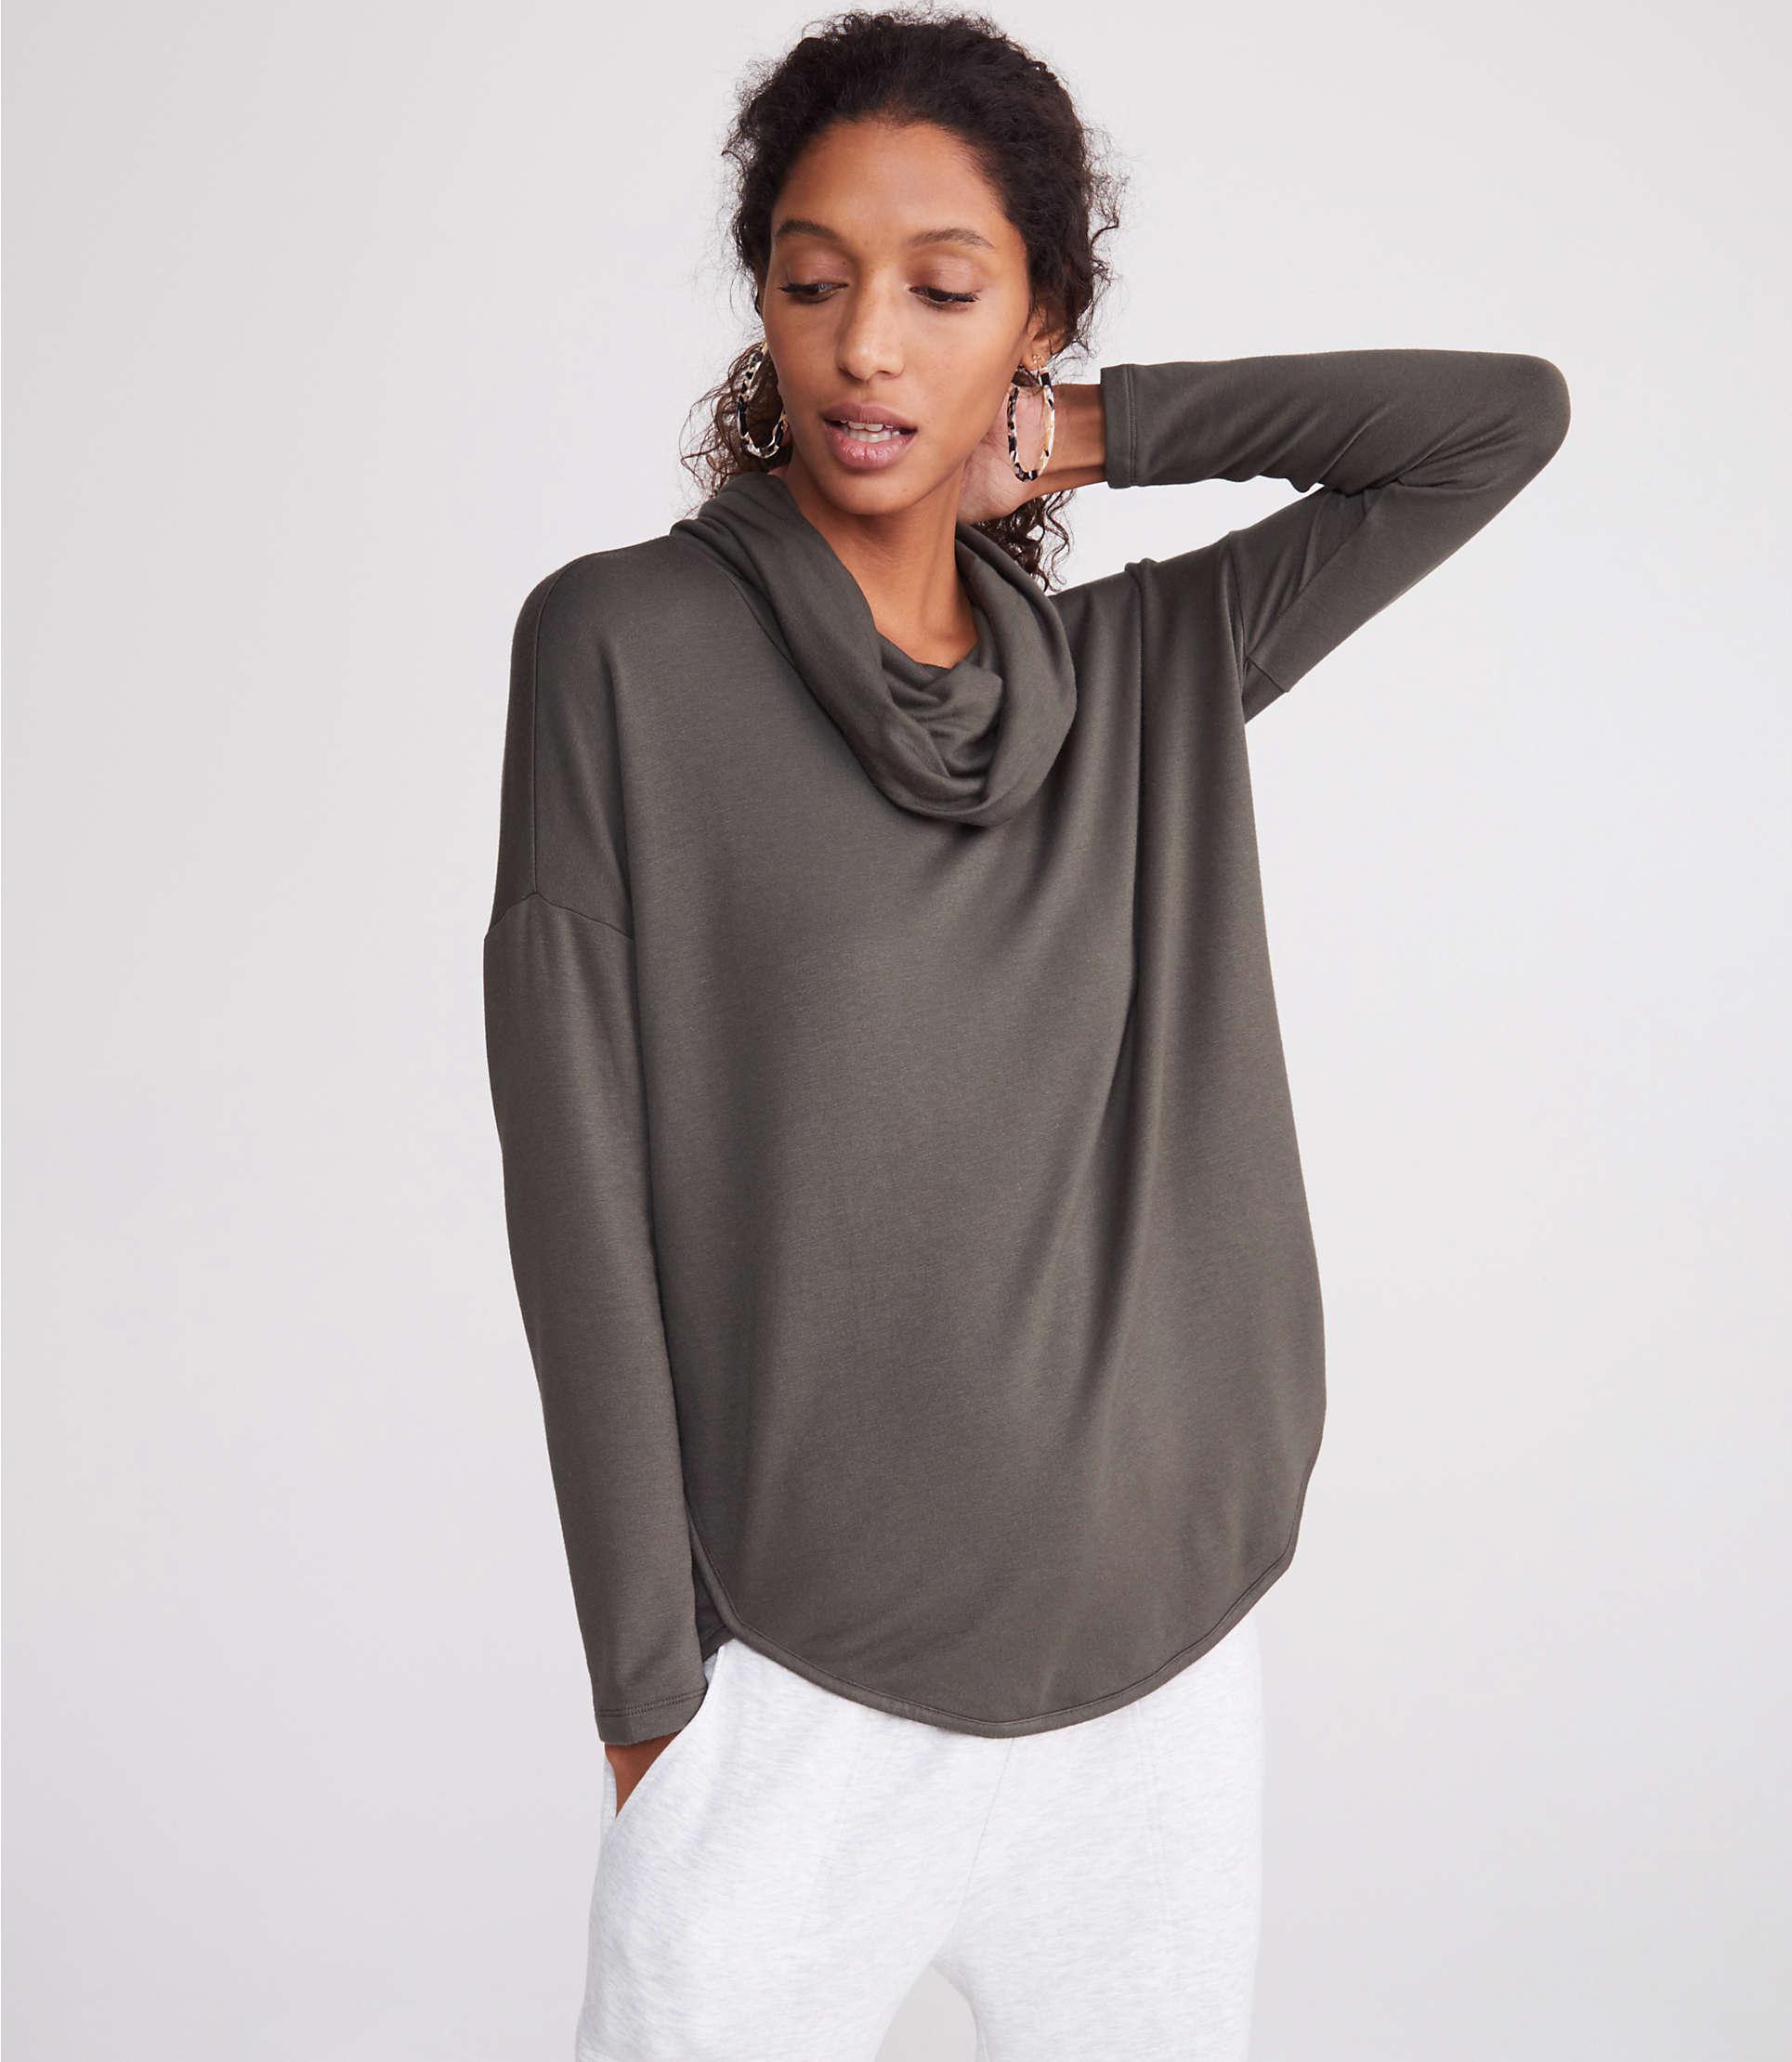 LOFT Cashmere Lou & Grey Signaturesoft Cowl Shirttail Top in Gray - Lyst